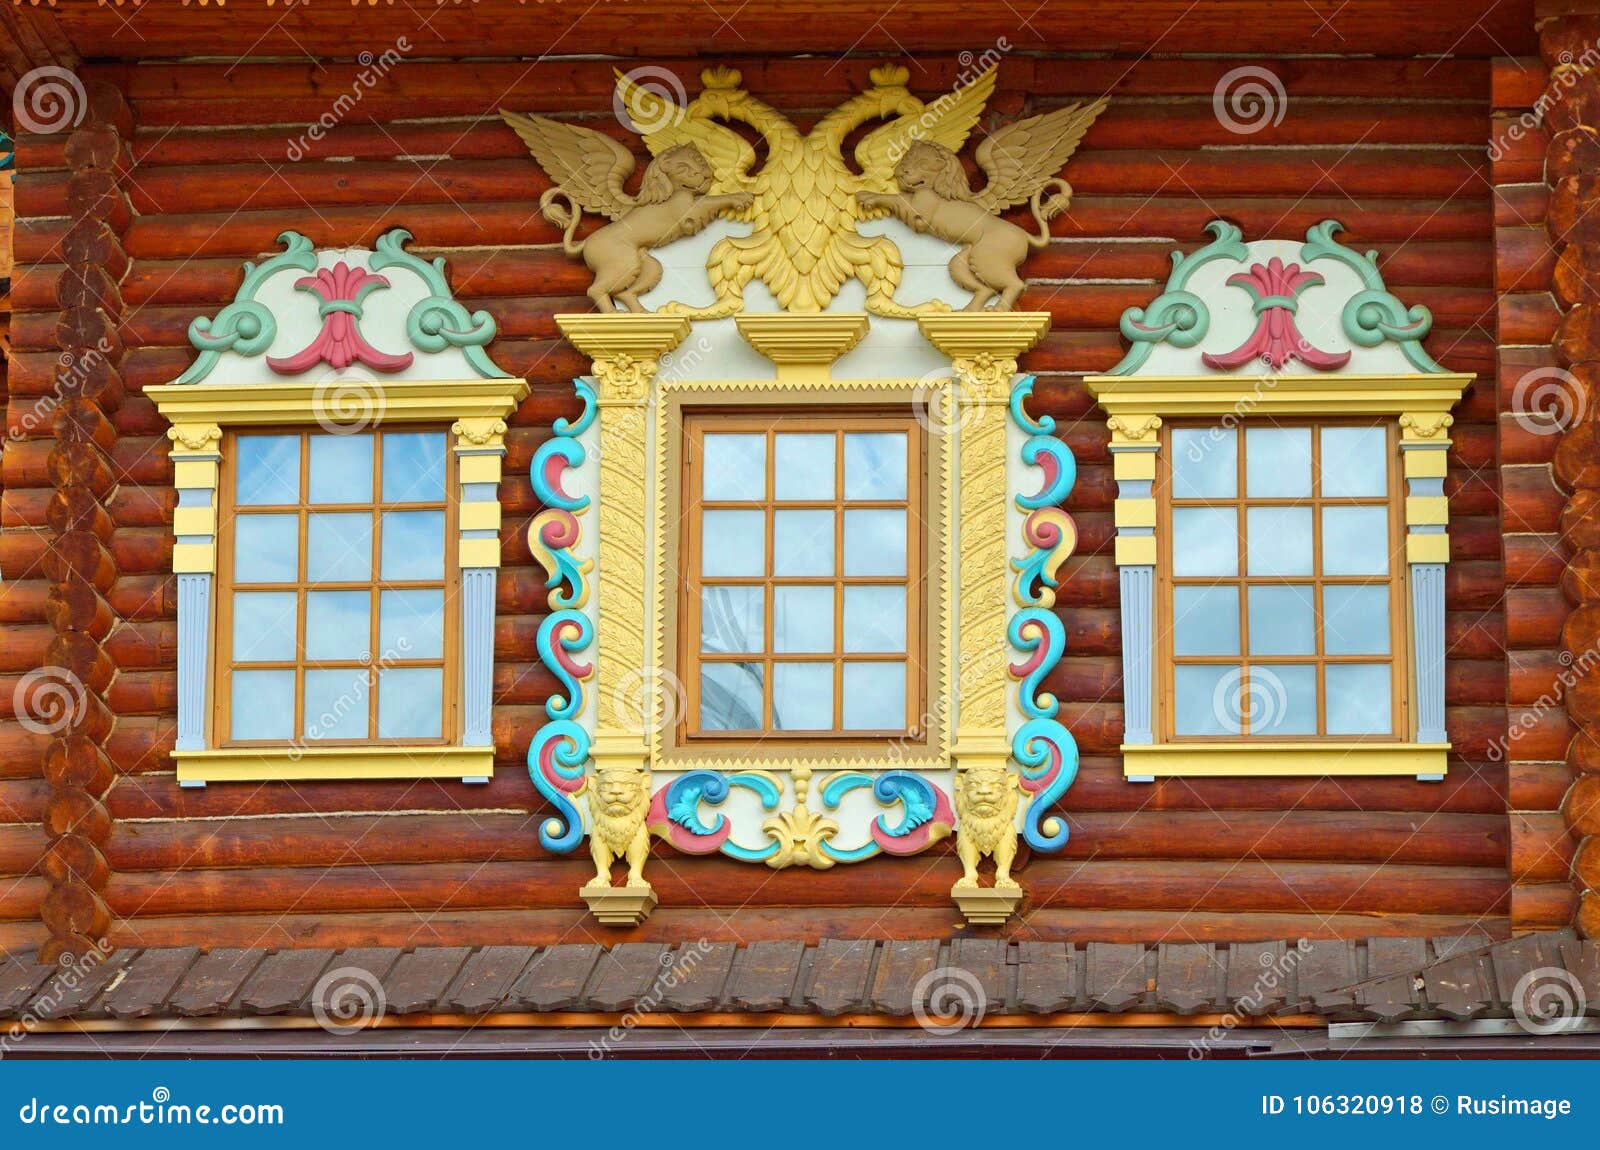 wooden palace of tzar aleksey mikhailovich in kolomenskoe reconstruction, moscow, russia